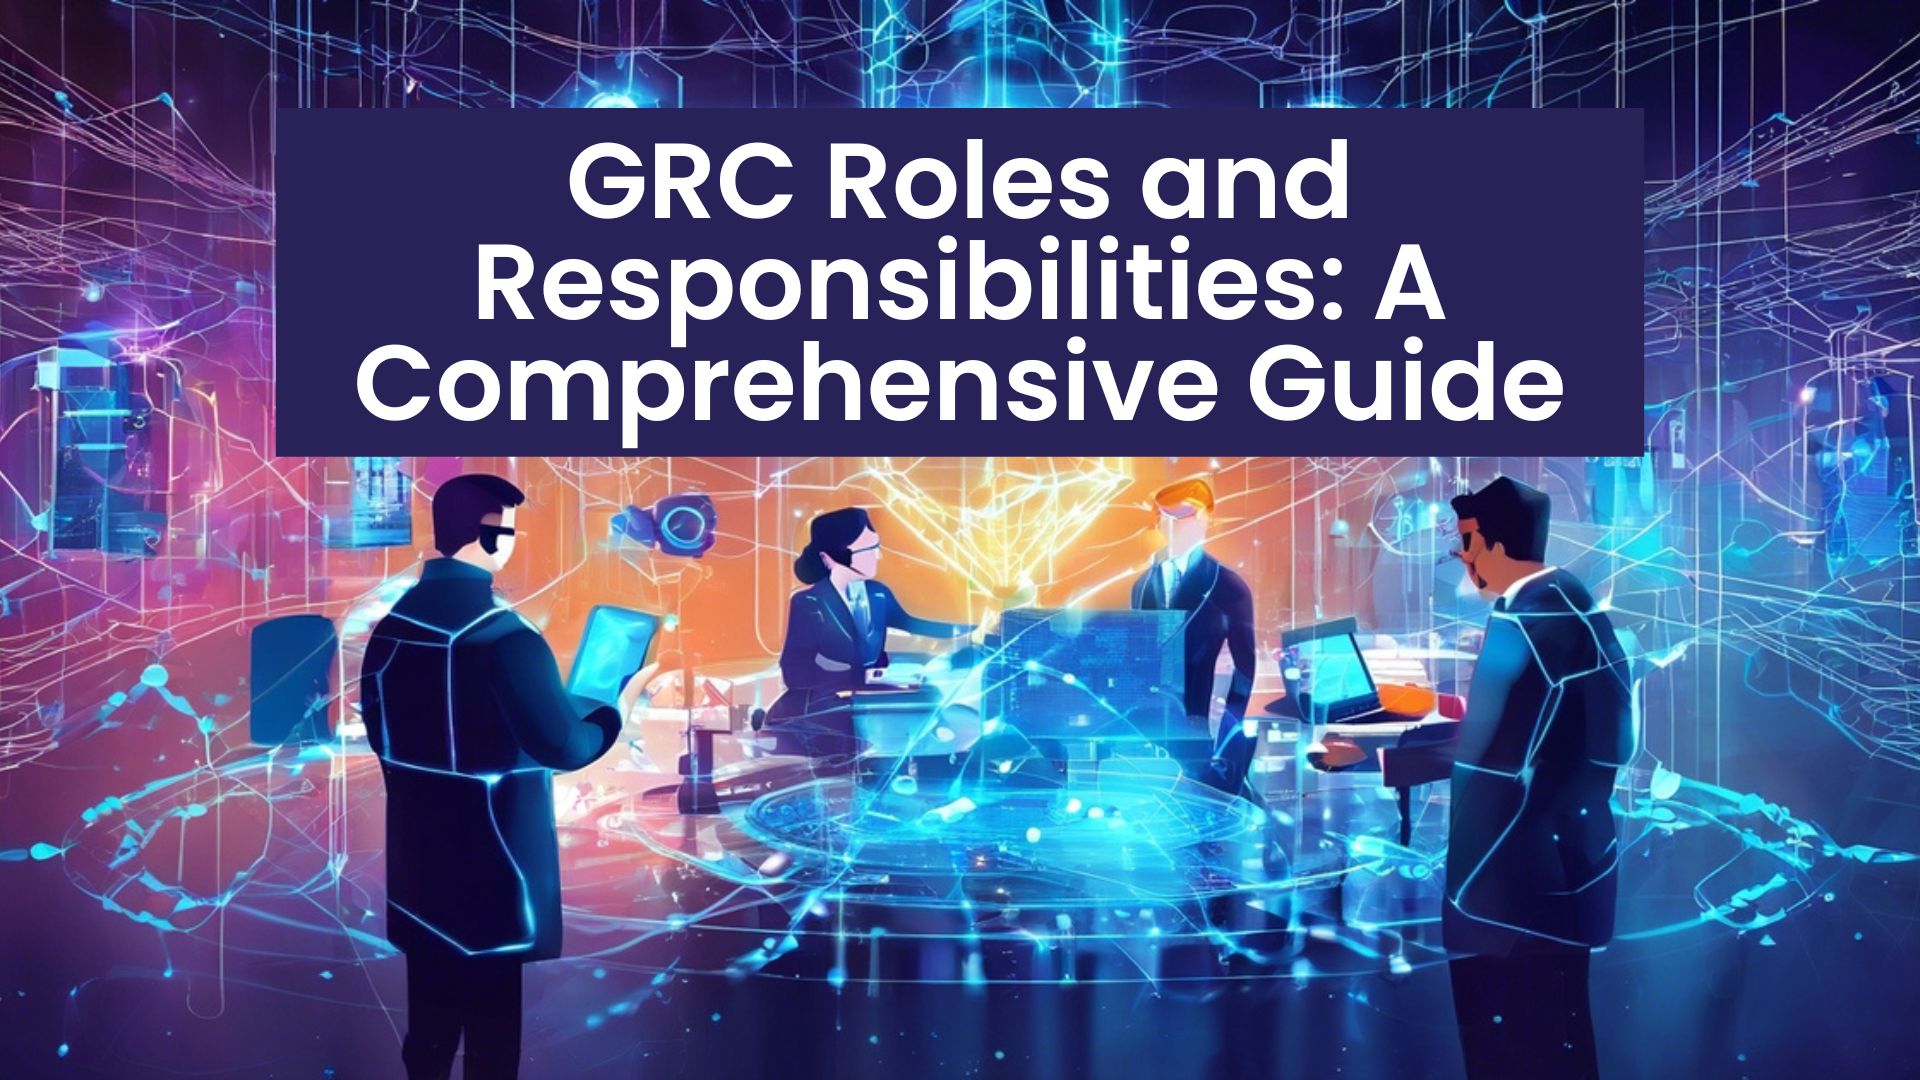 GRC Roles and Responsibilities A Comprehensive Guide